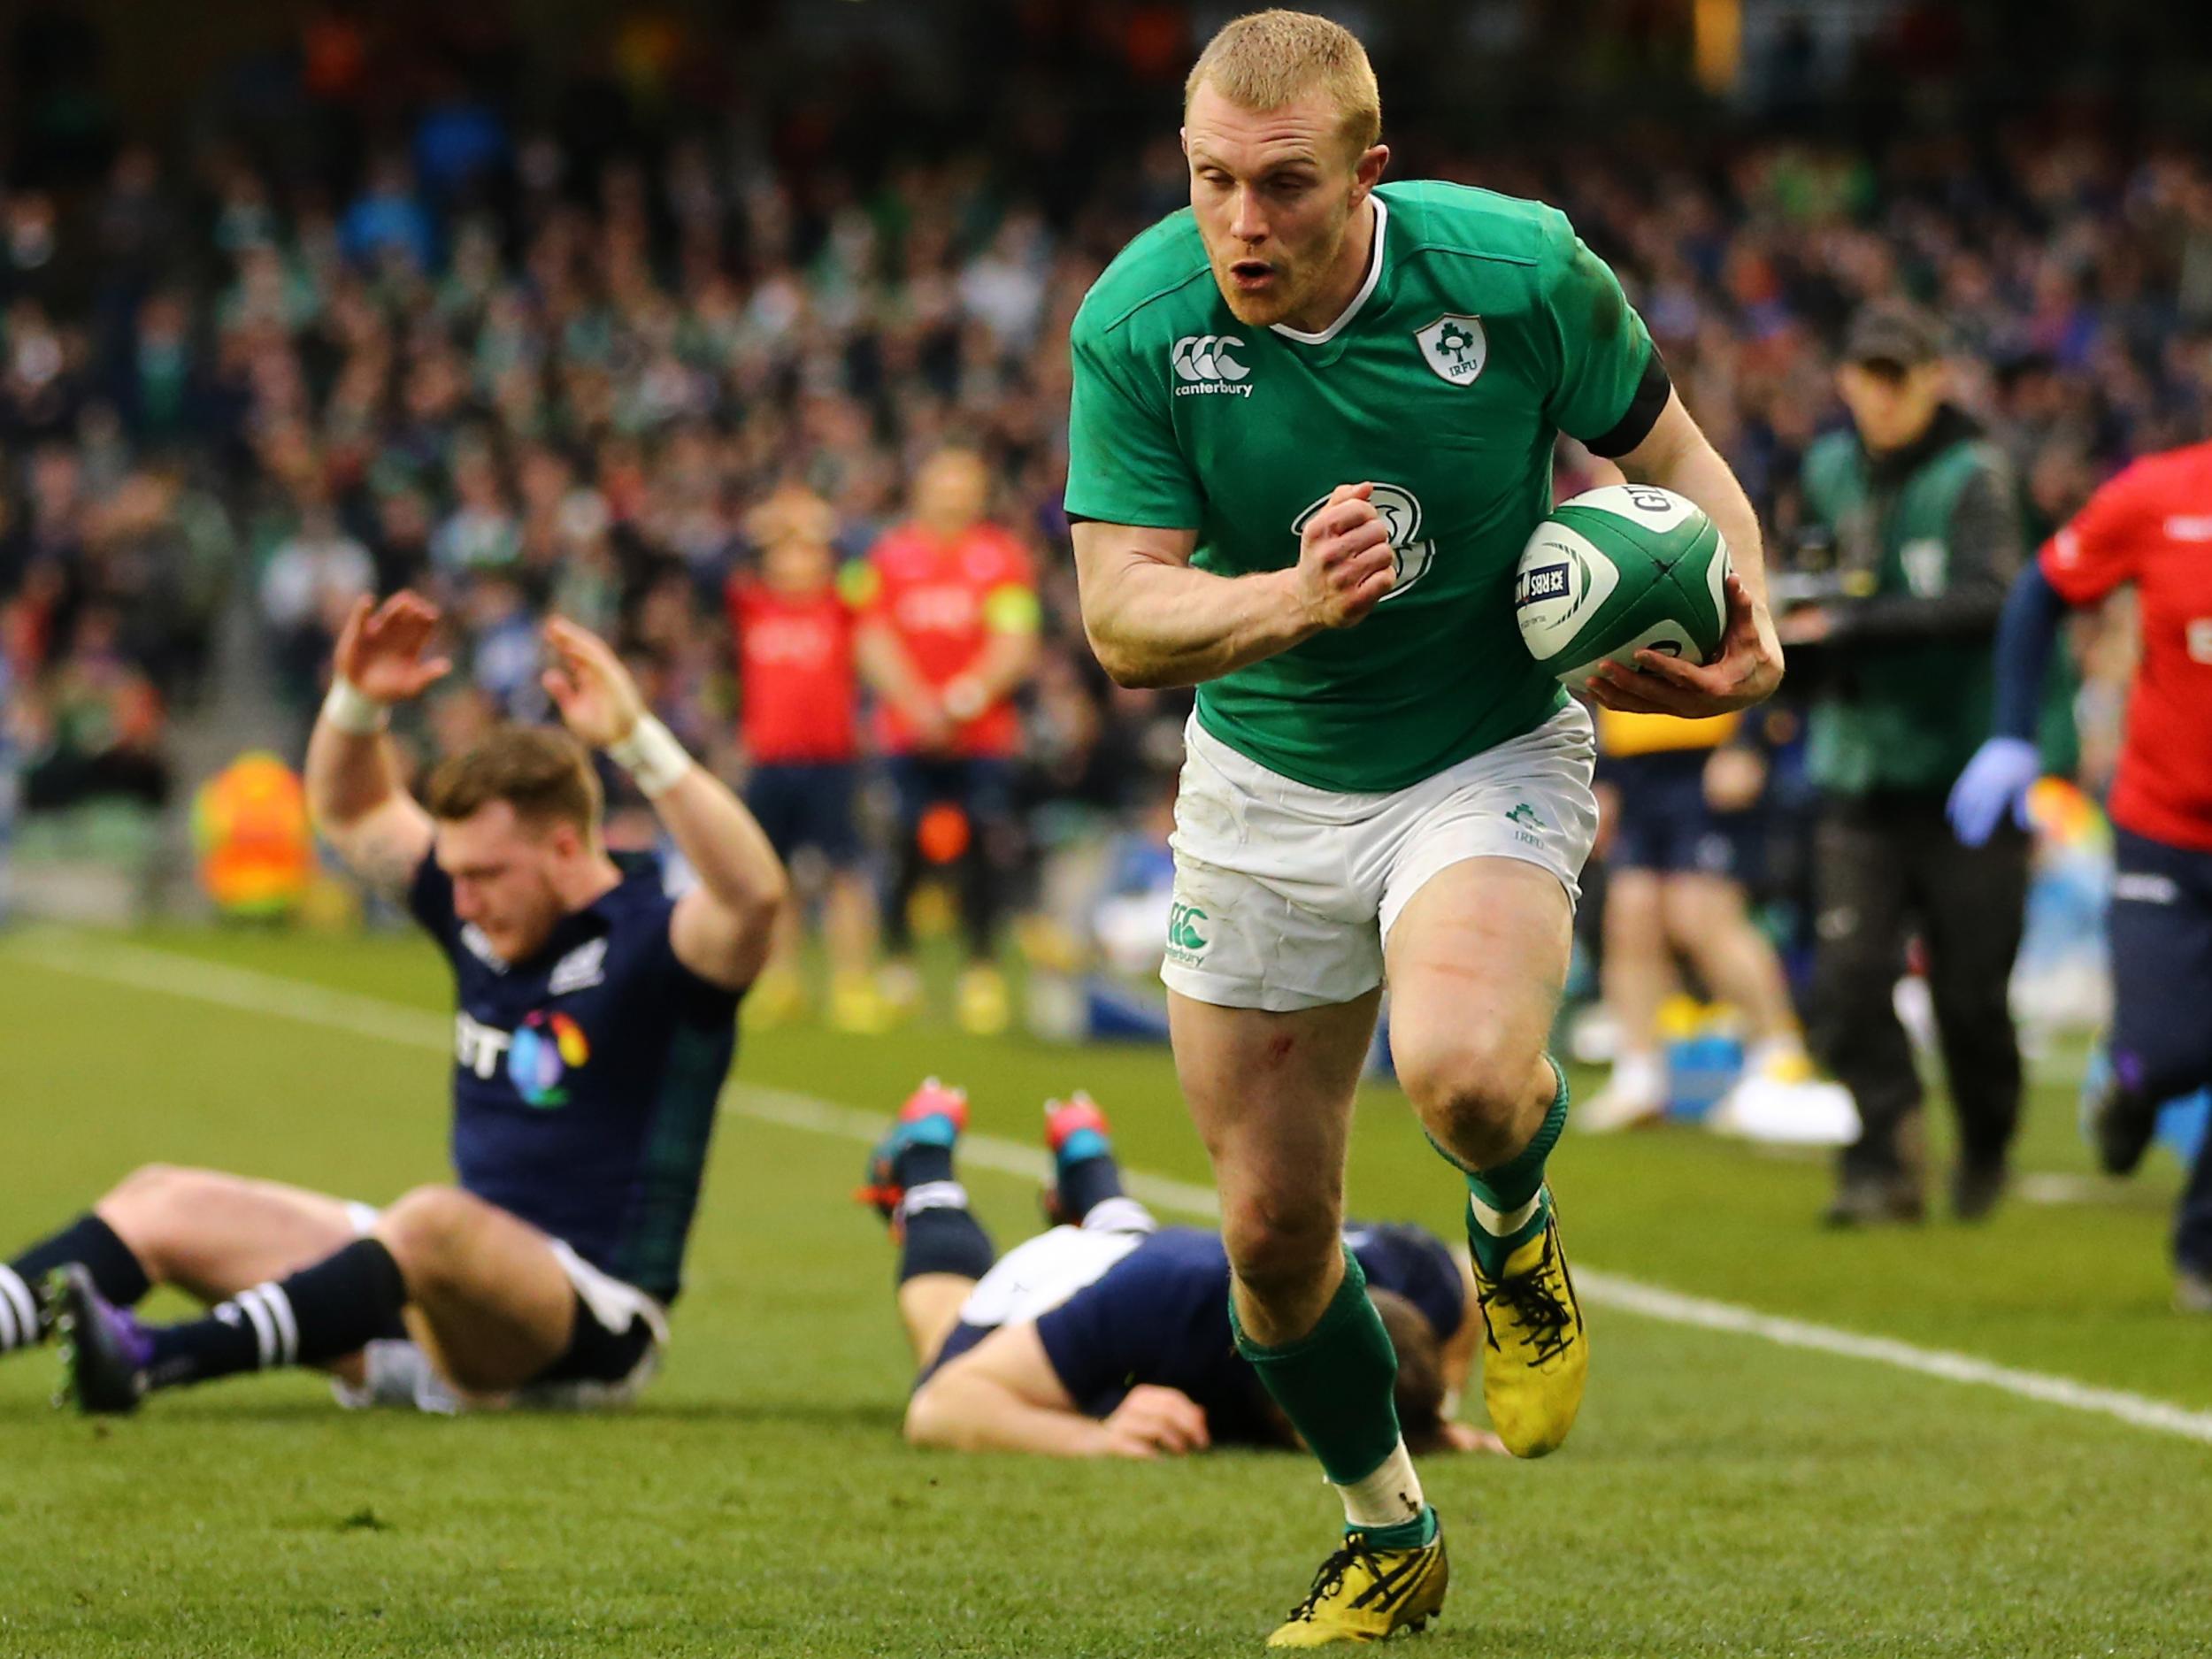 Keith Earls will start on the wing